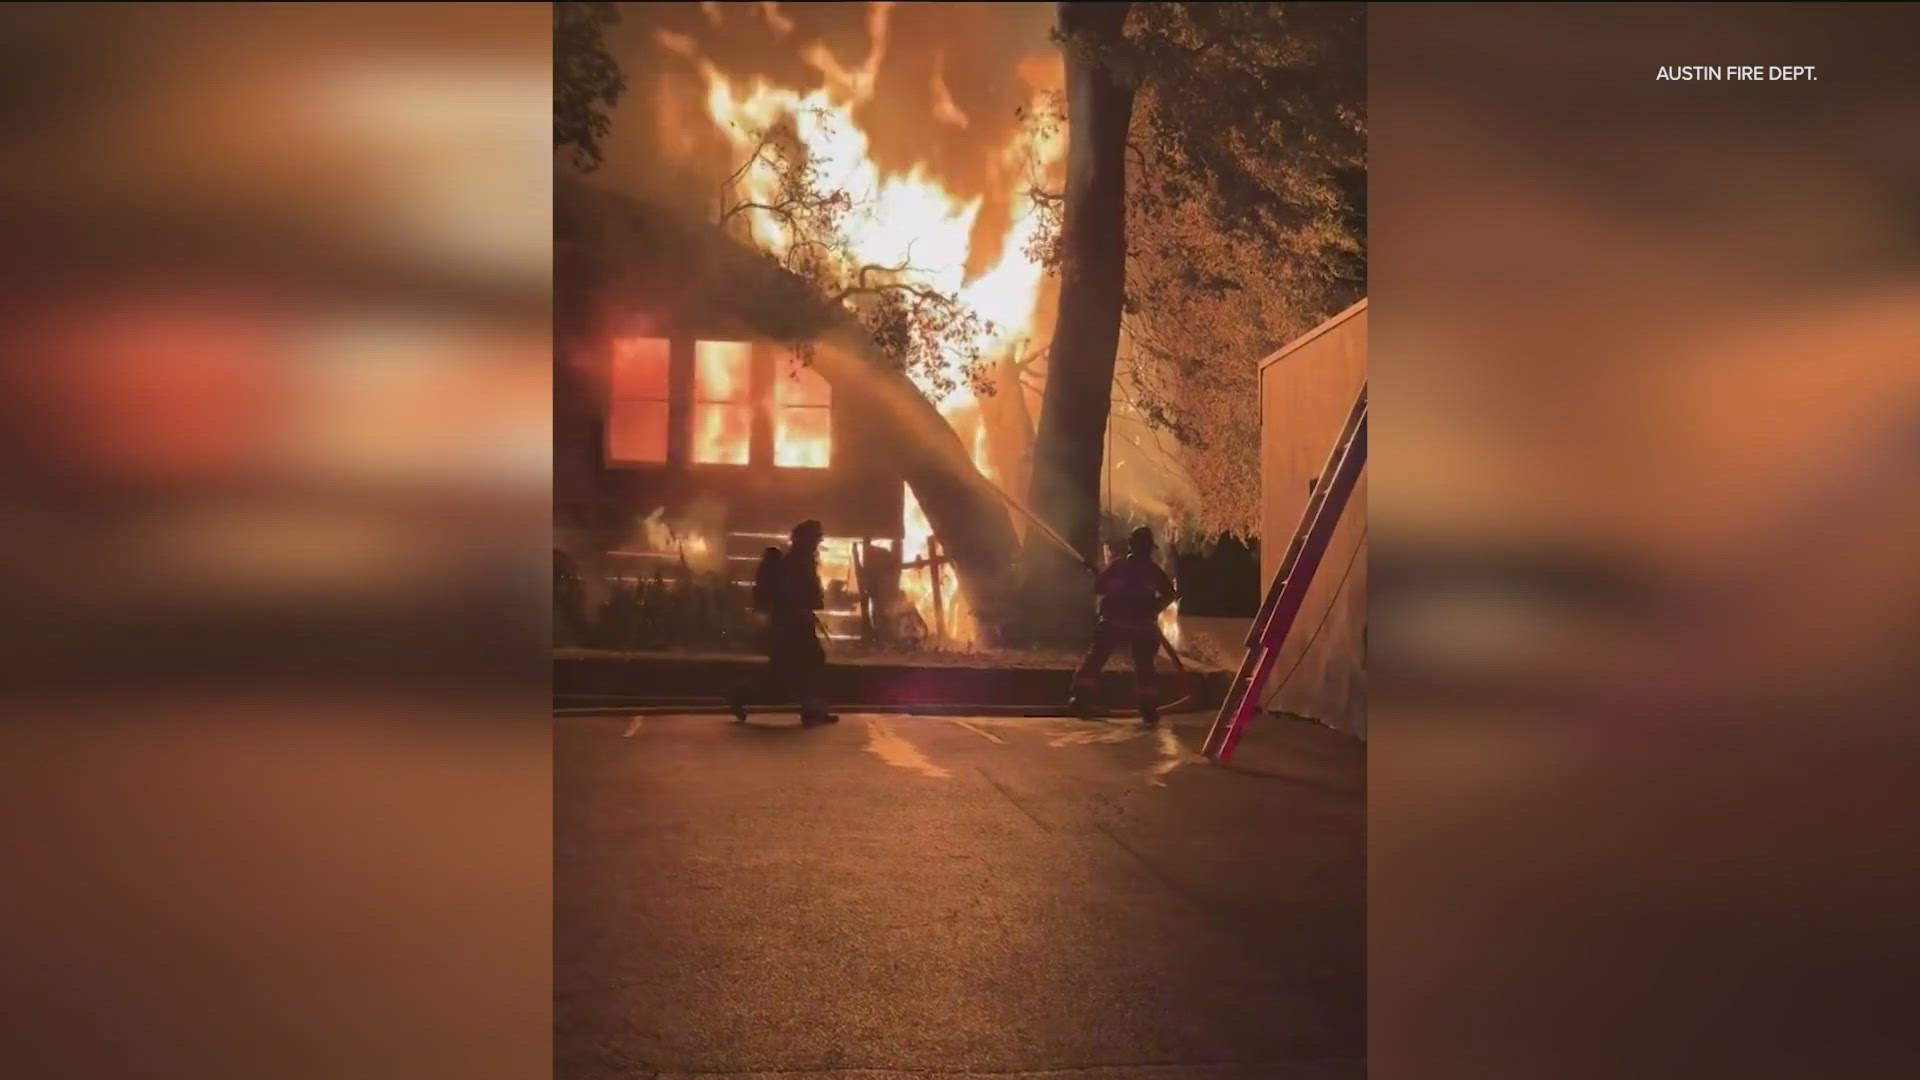 The Austin Fire Department battled a house fire in West Austin early Sunday morning.